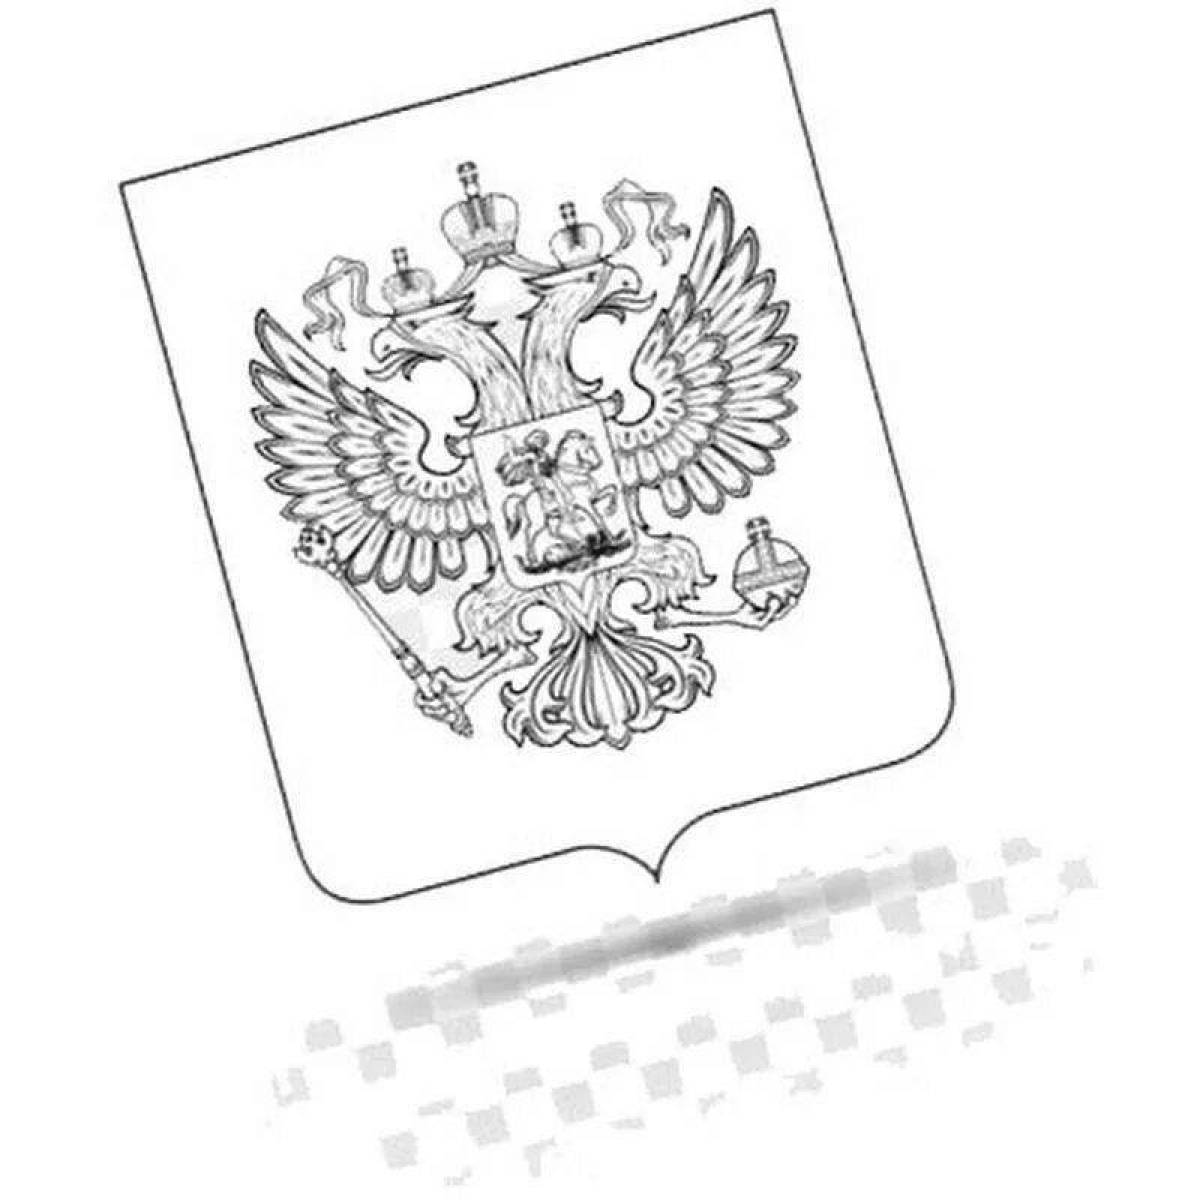 Coat of arms of the Russian Federation #11